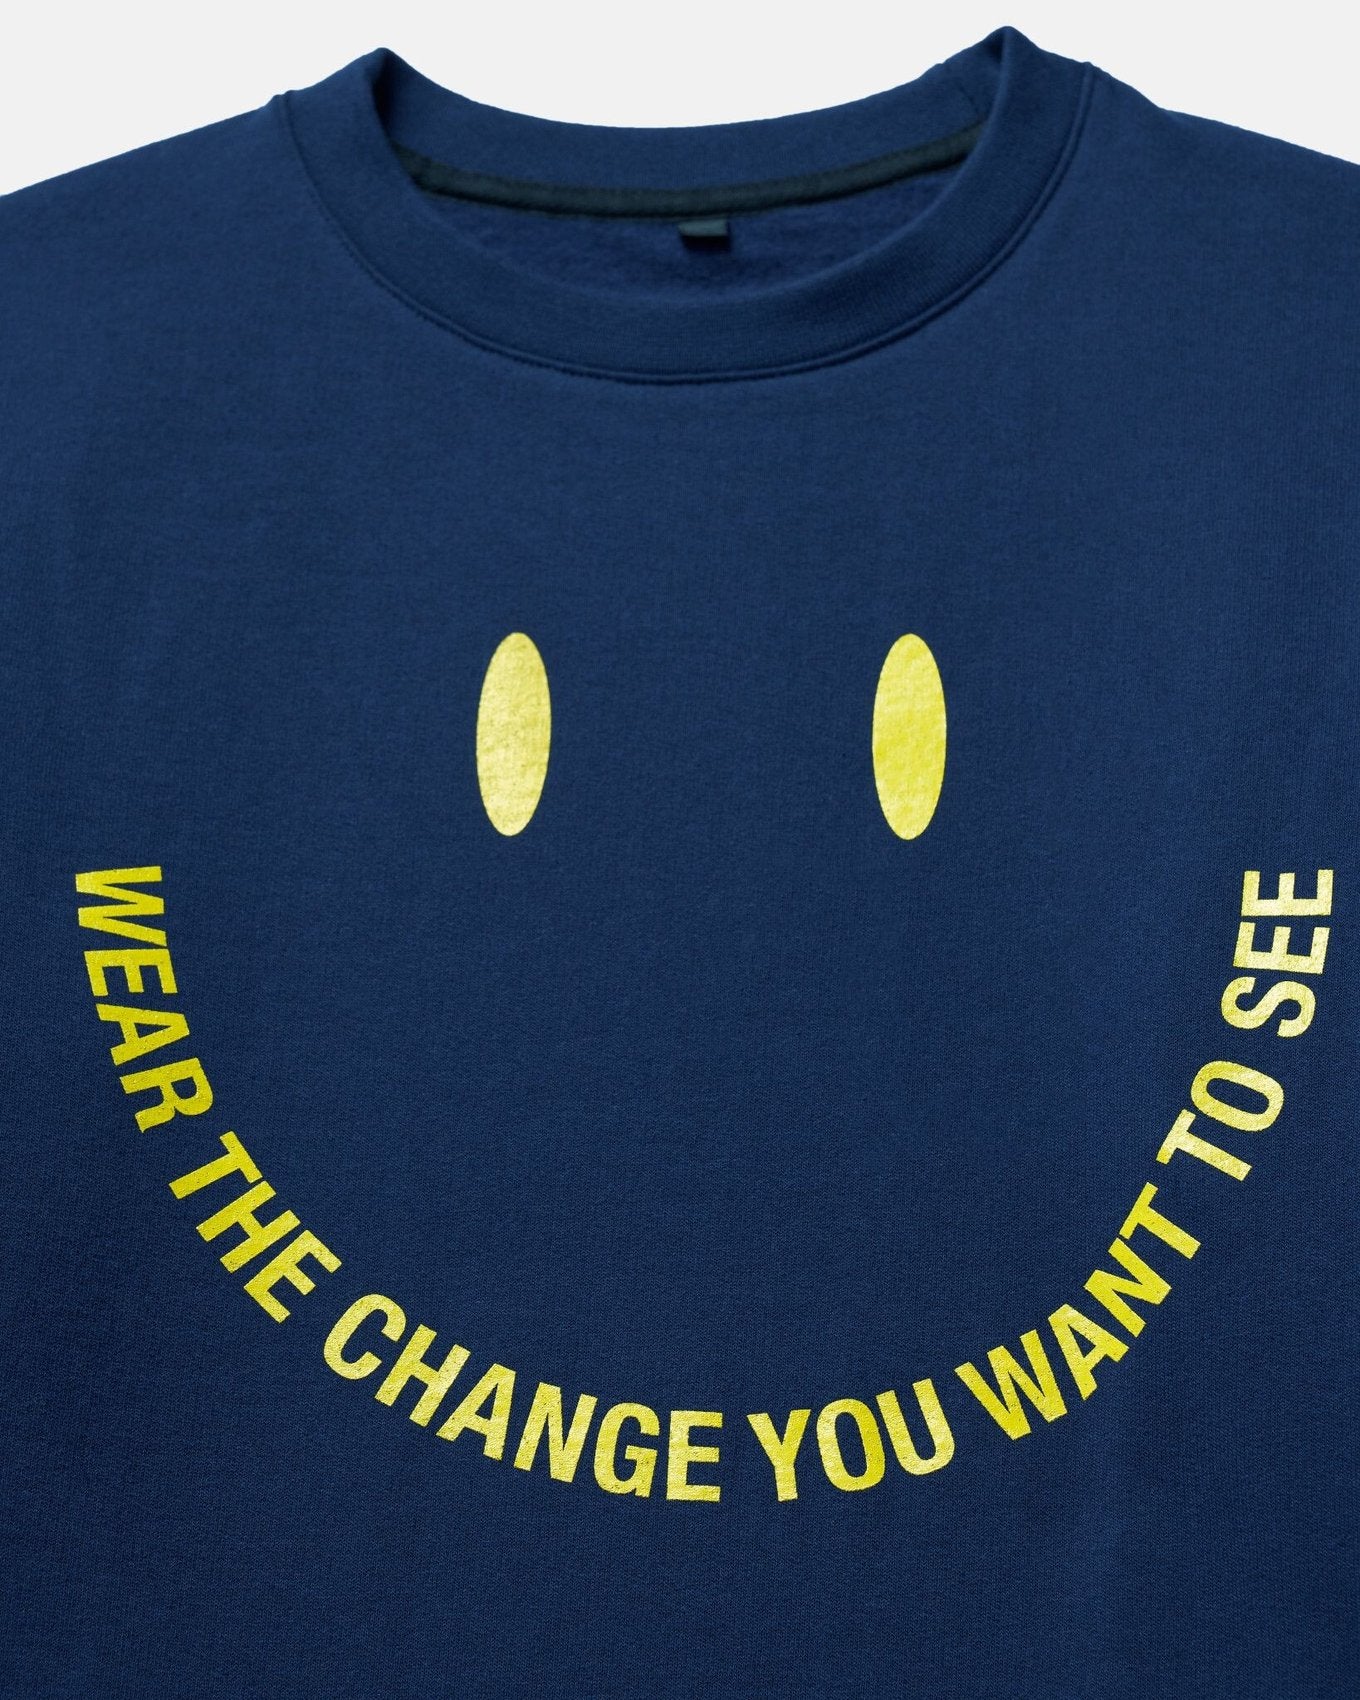 ReApparel Change Crew Neck . in color Navy Blue and shape long sleeve